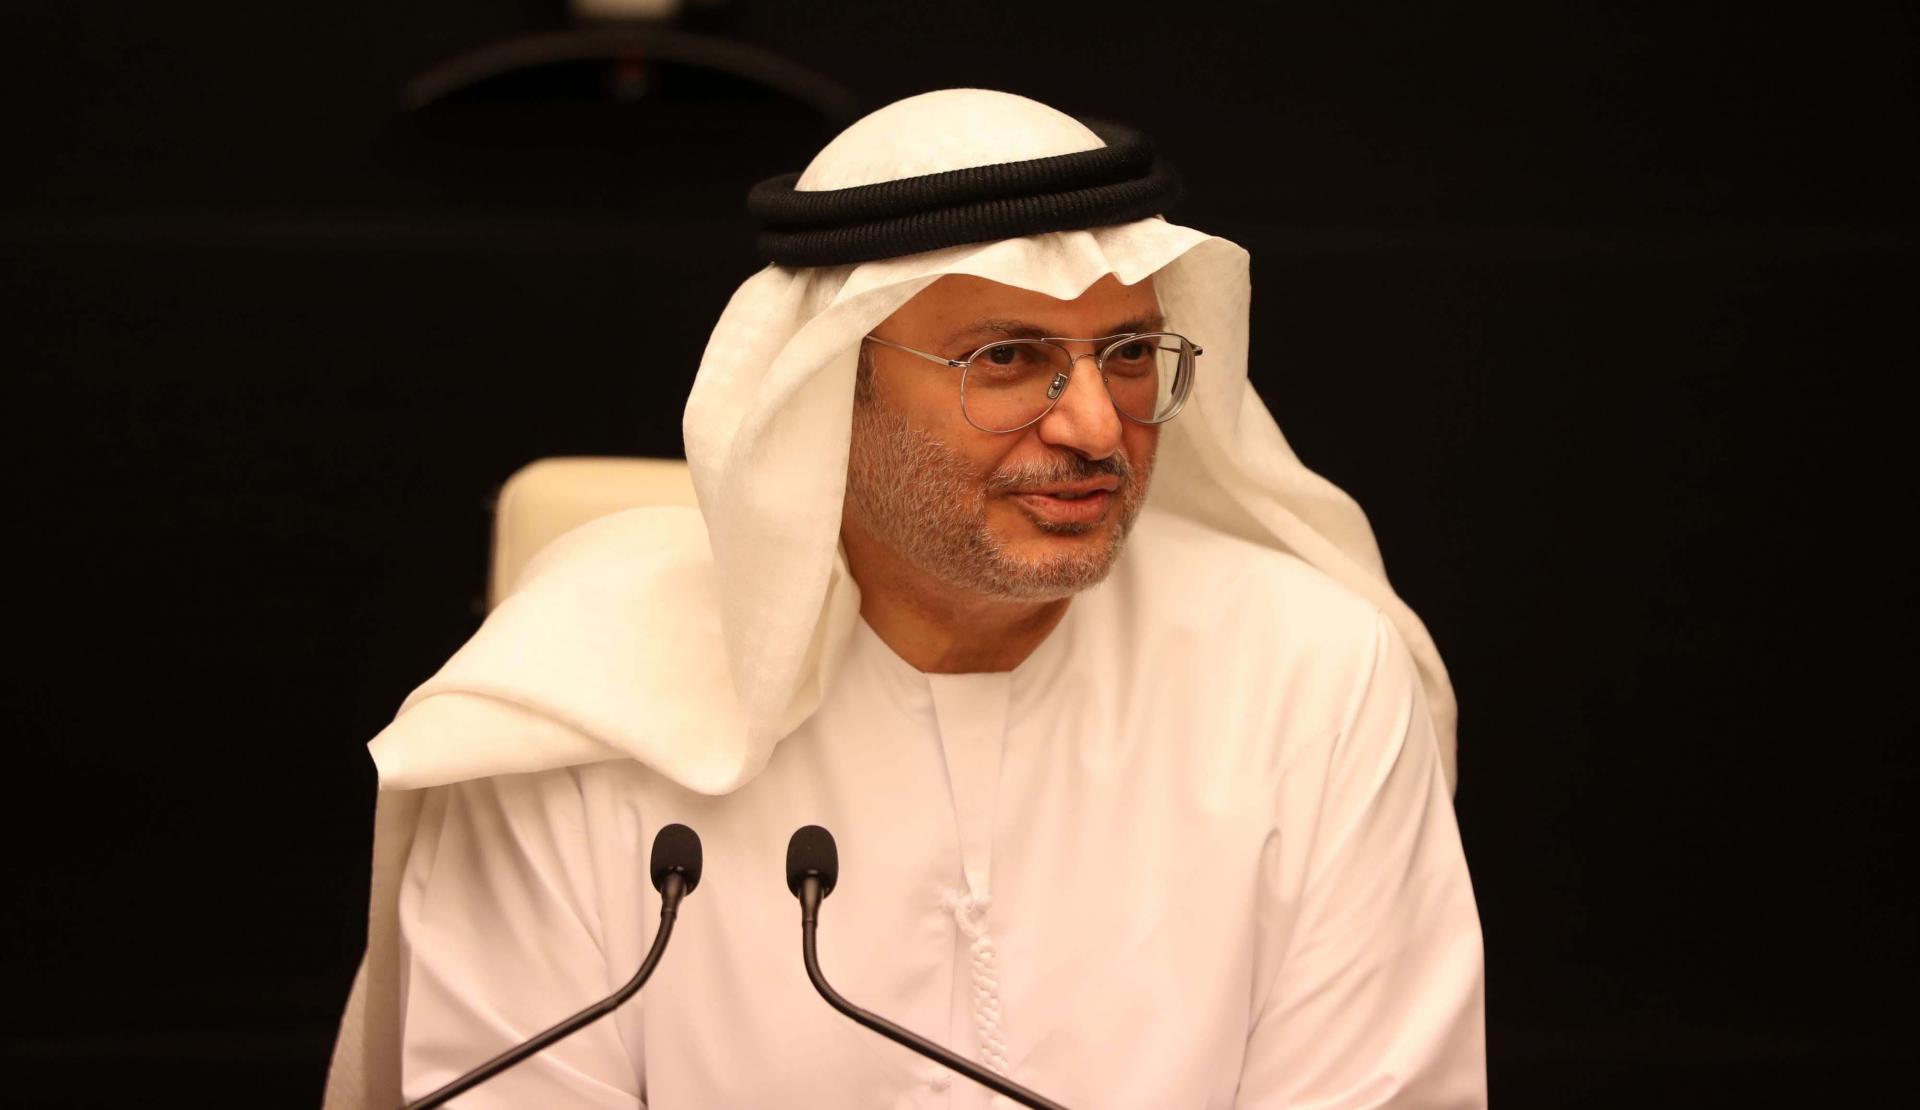 UAE minister of state for foreign affairs Anwar Gargash 